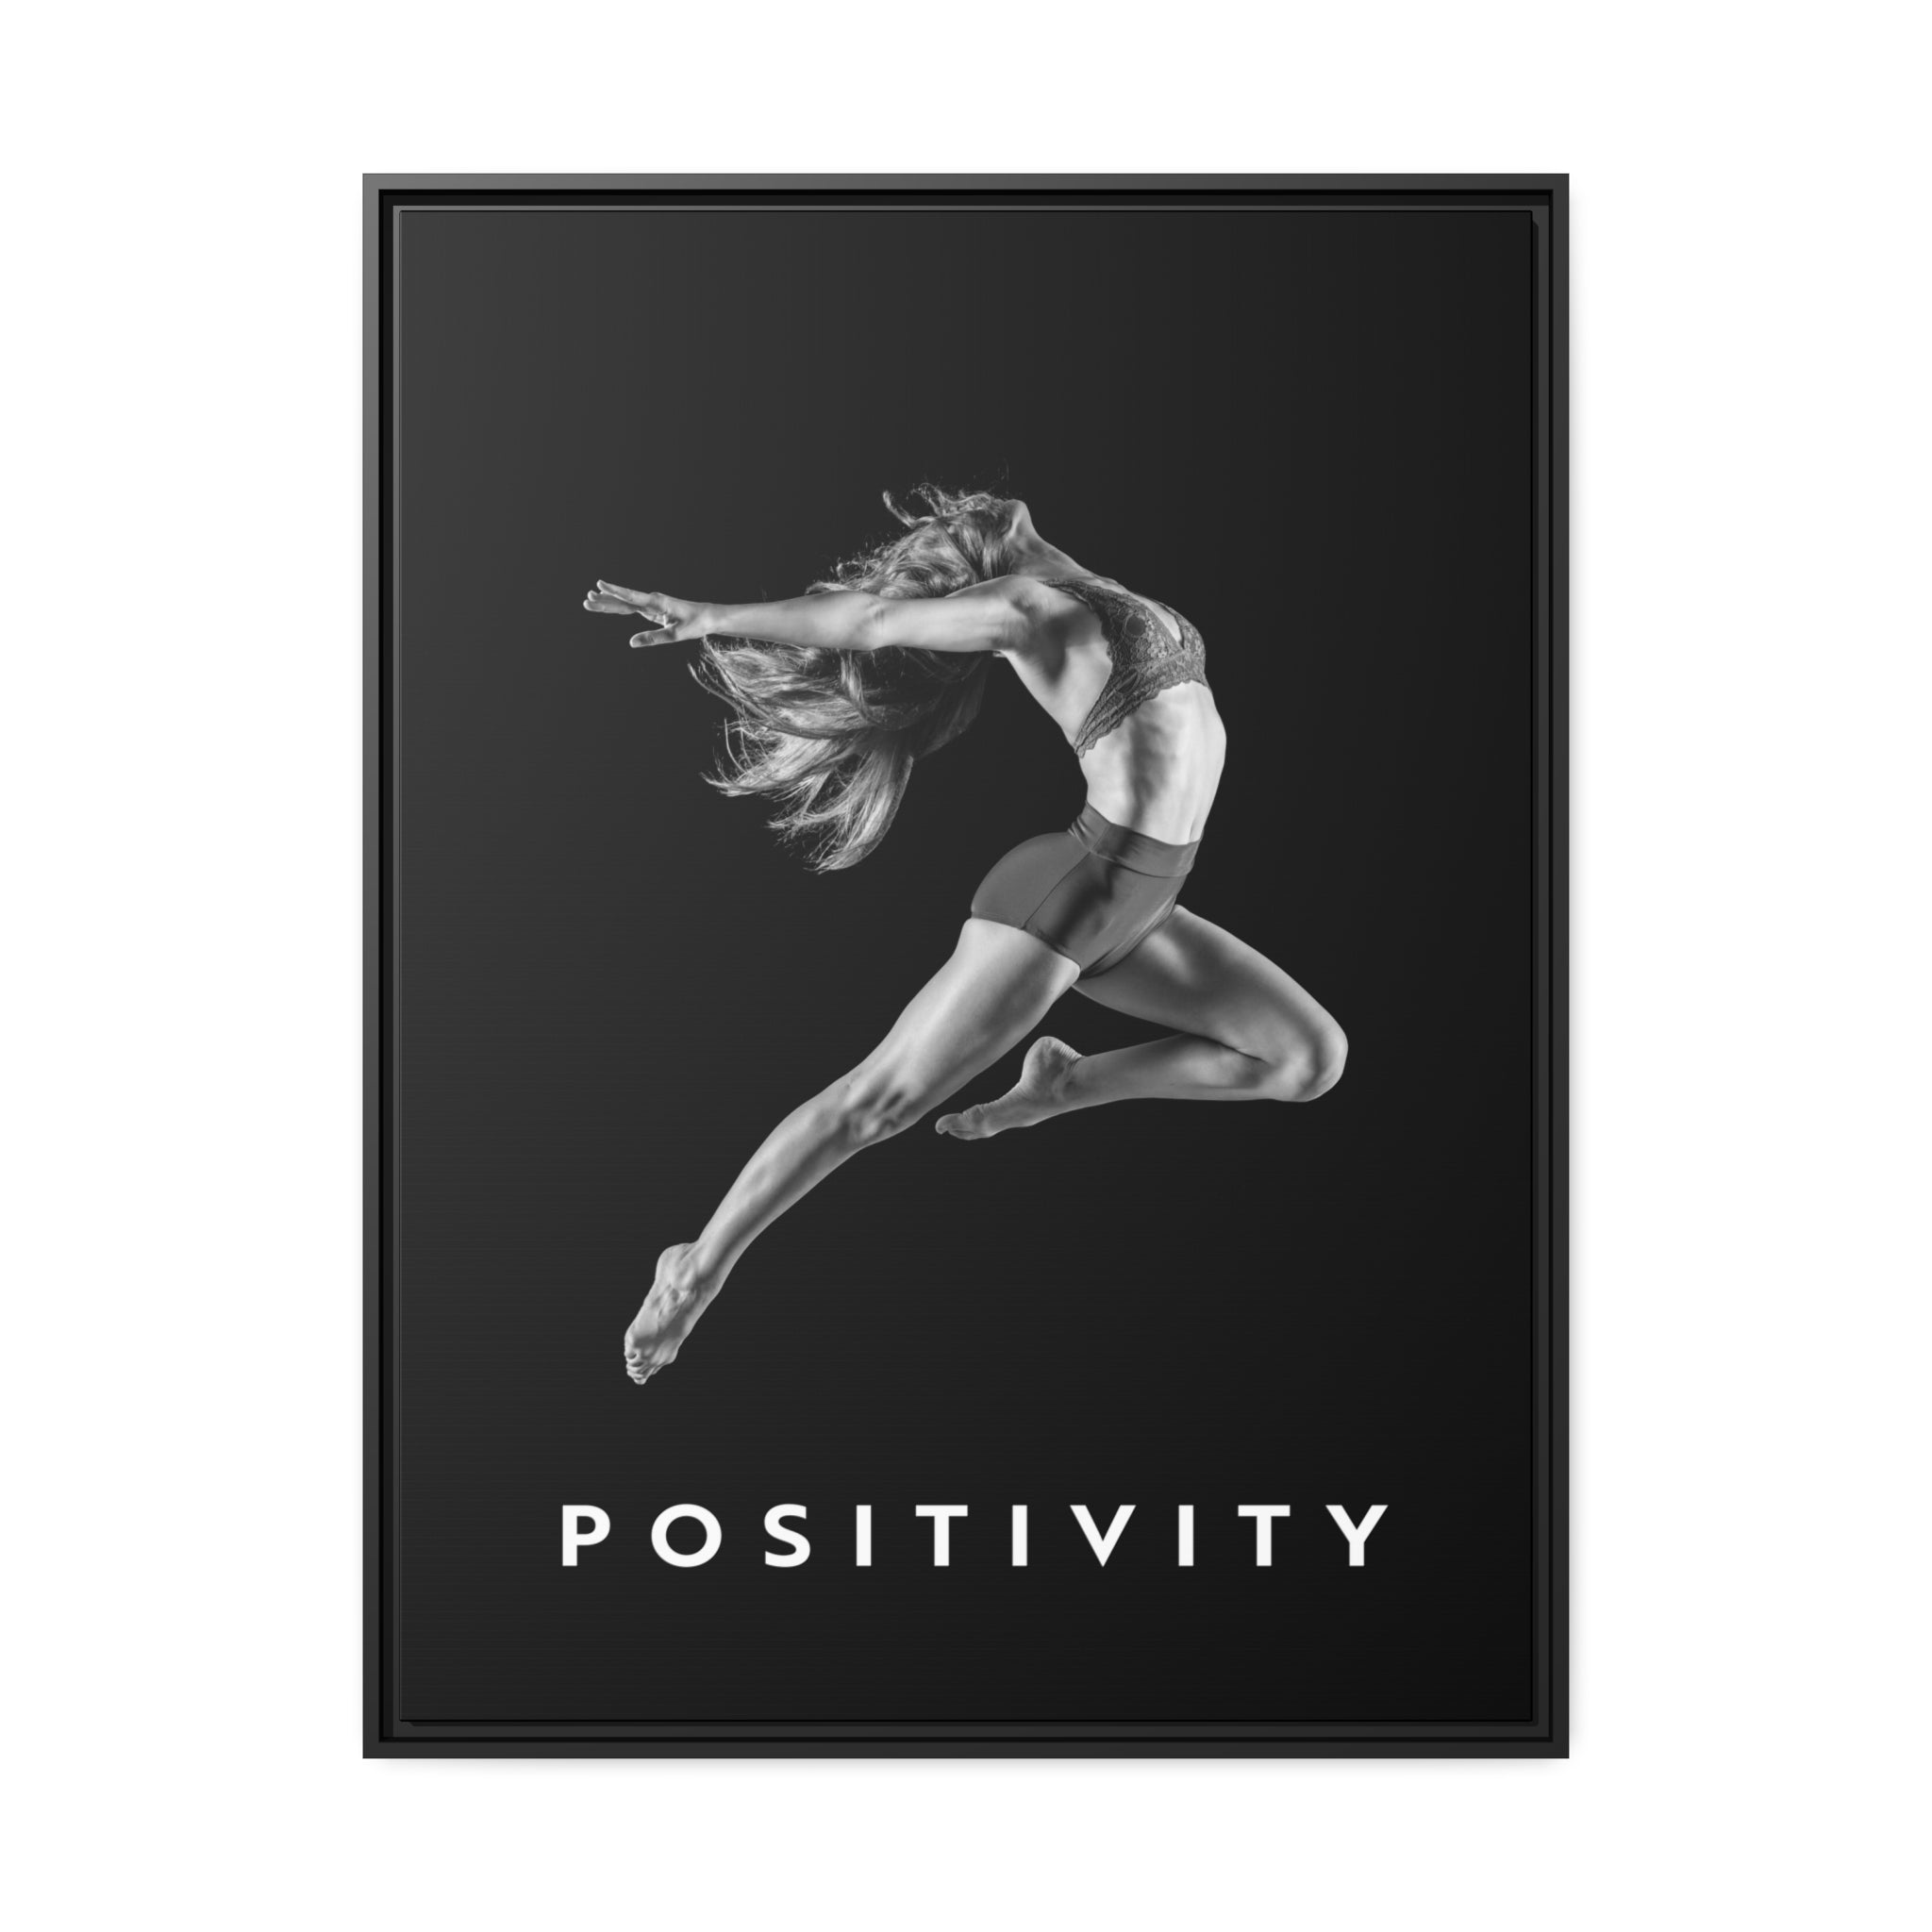 Positivity - Airborne Black And White - Wall Art additional image 5